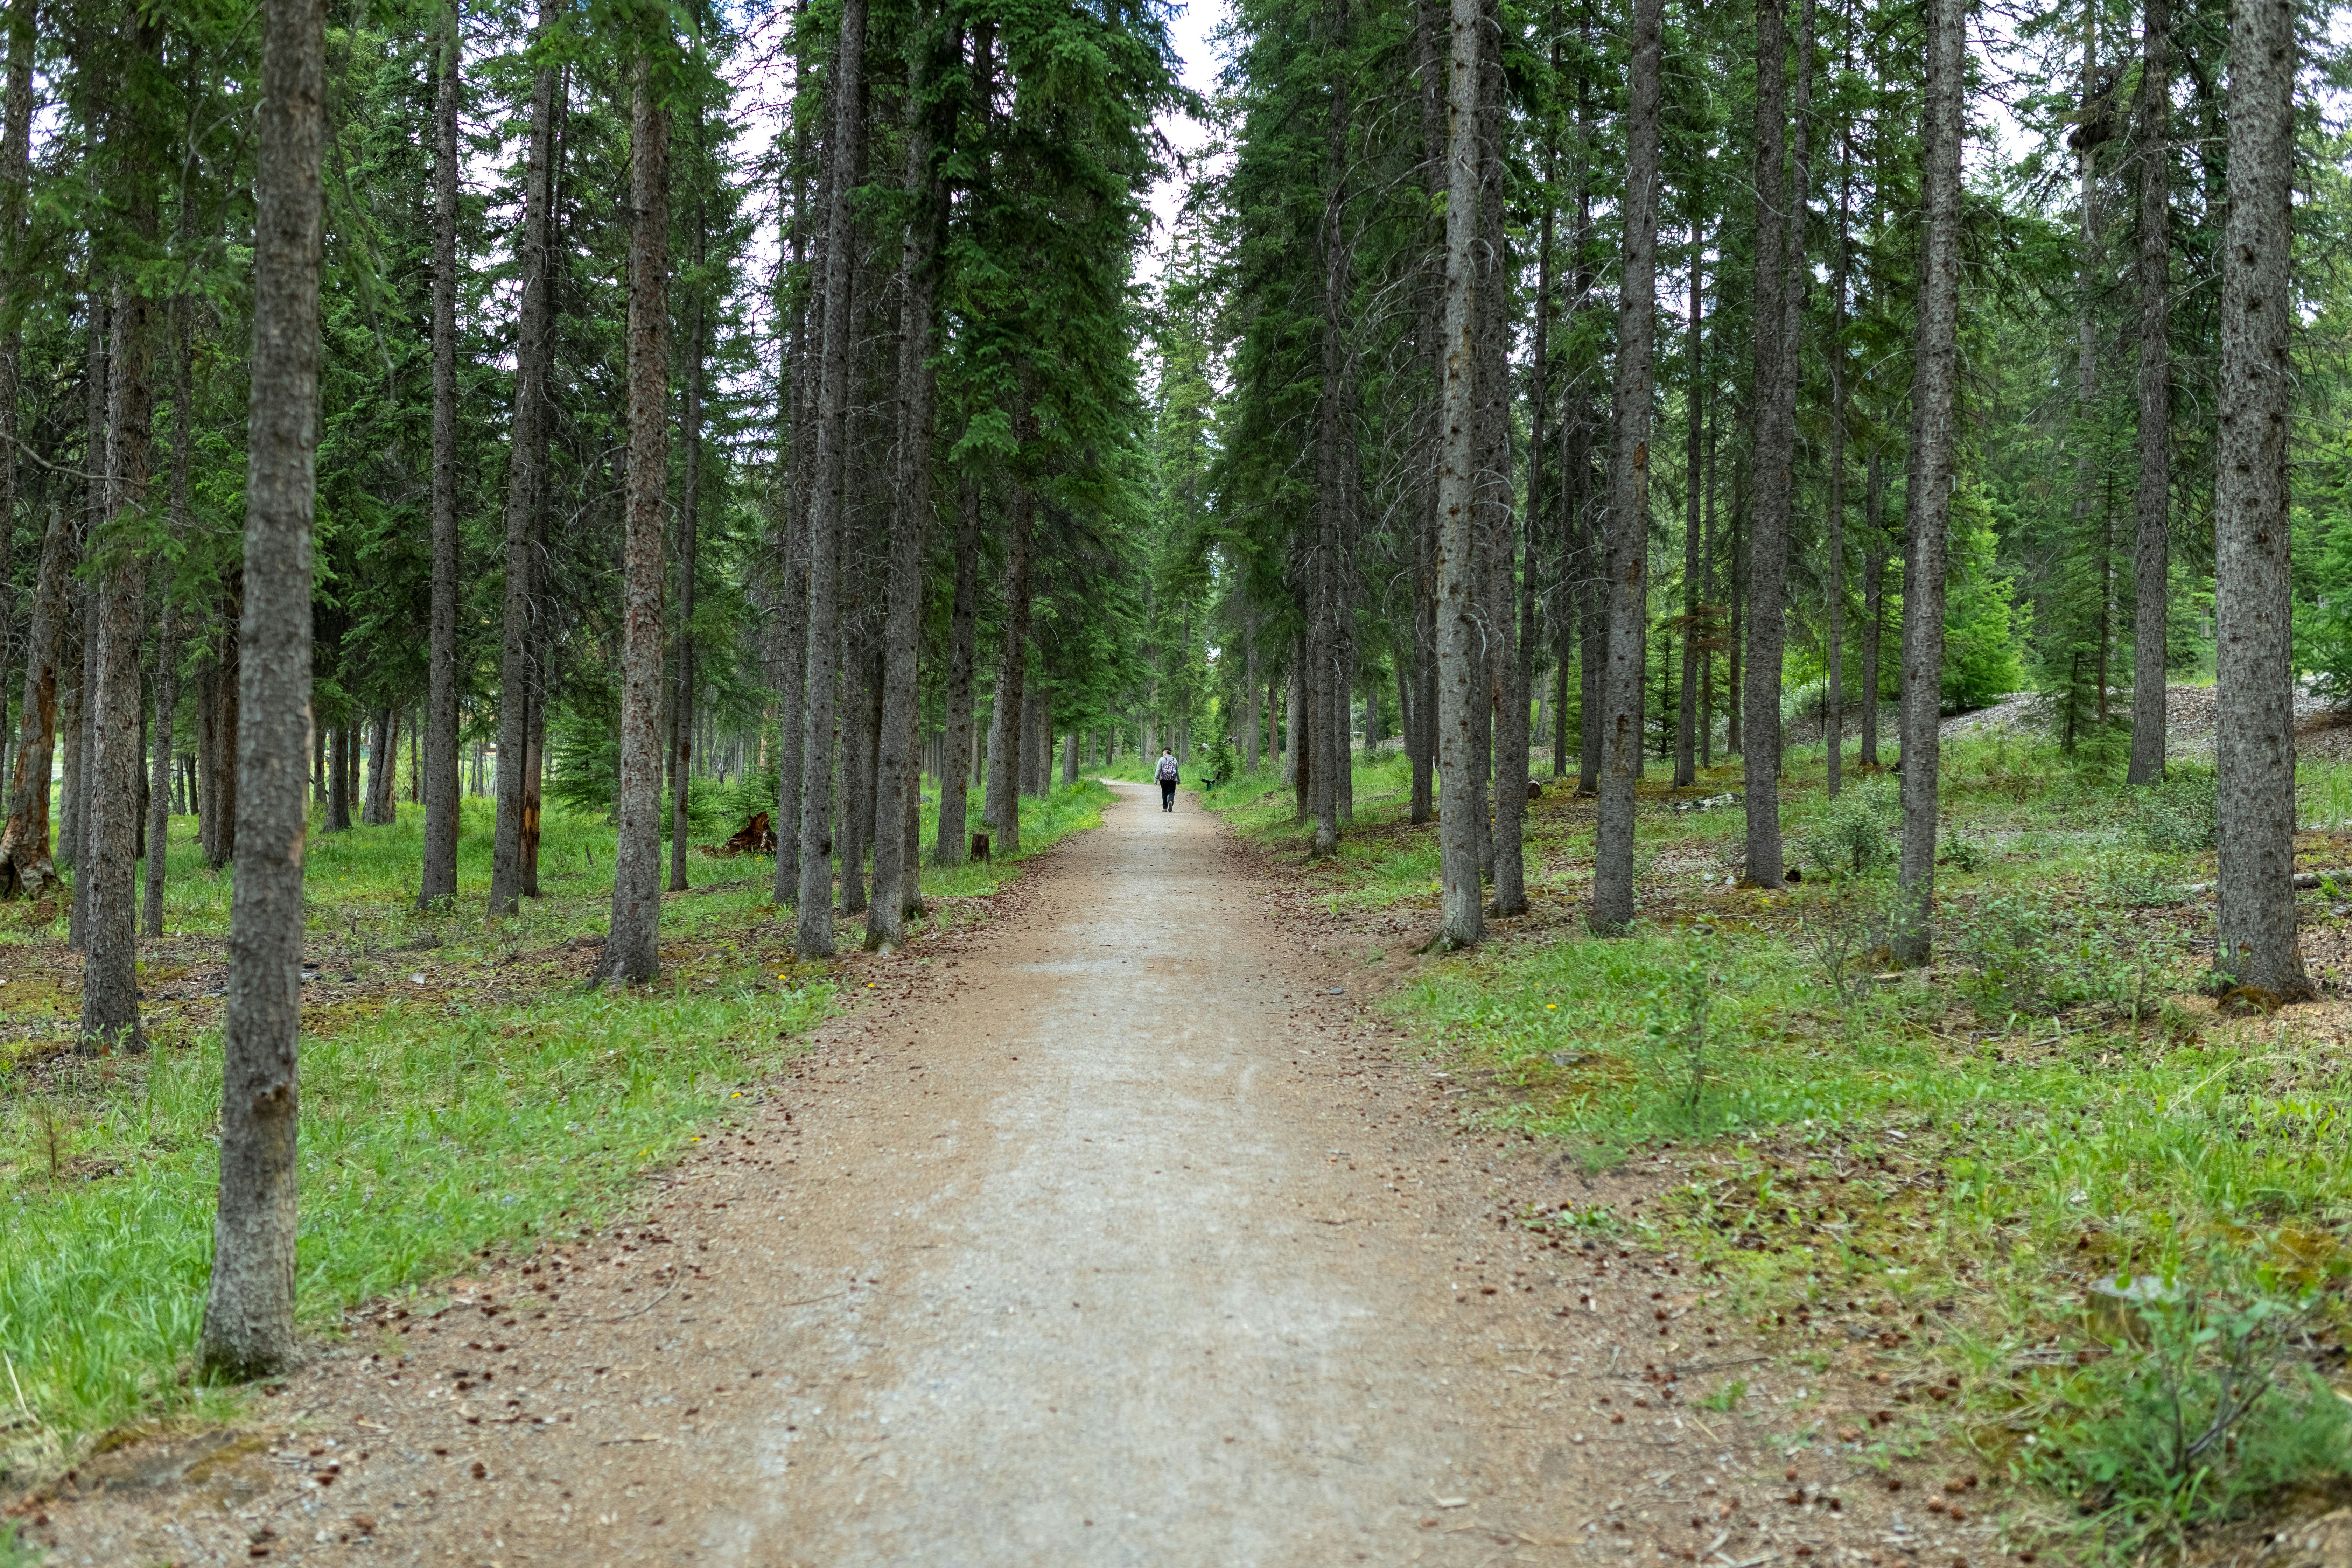 person in white jacket walking on pathway between green trees during daytime